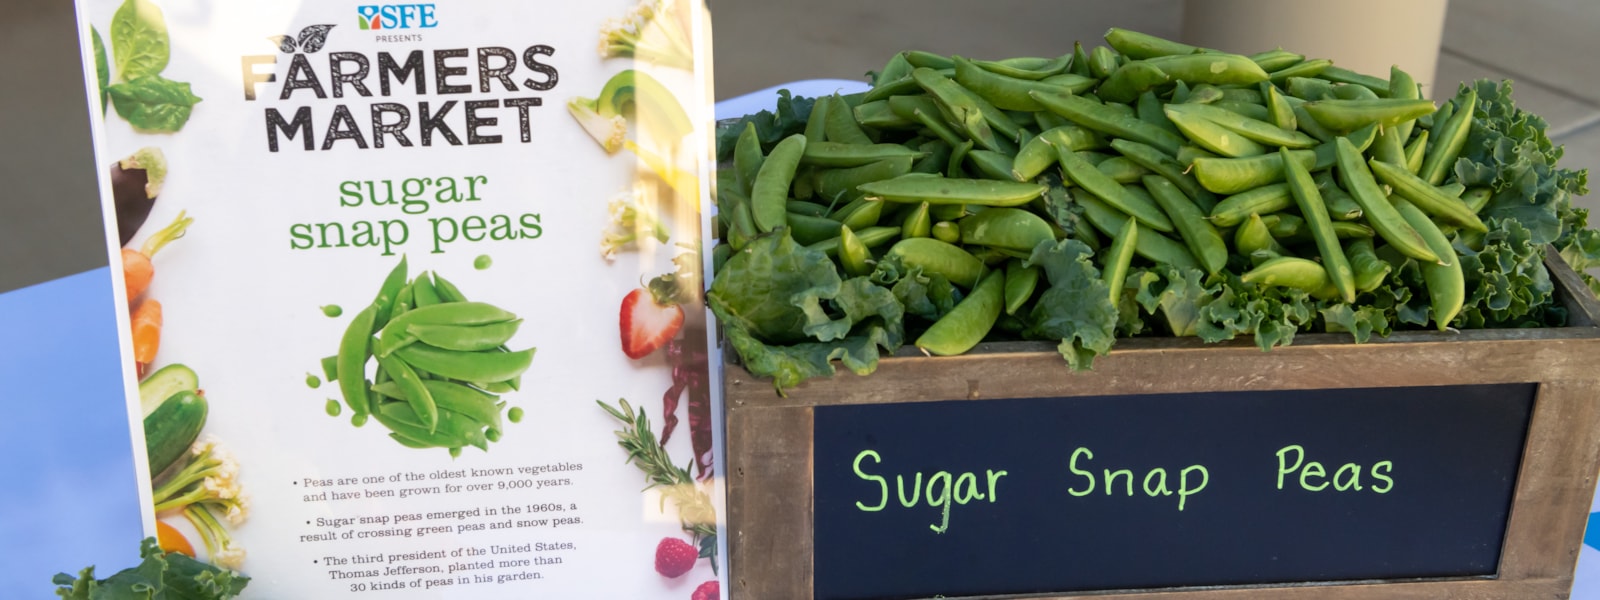 fresh snap peas in wooden crate